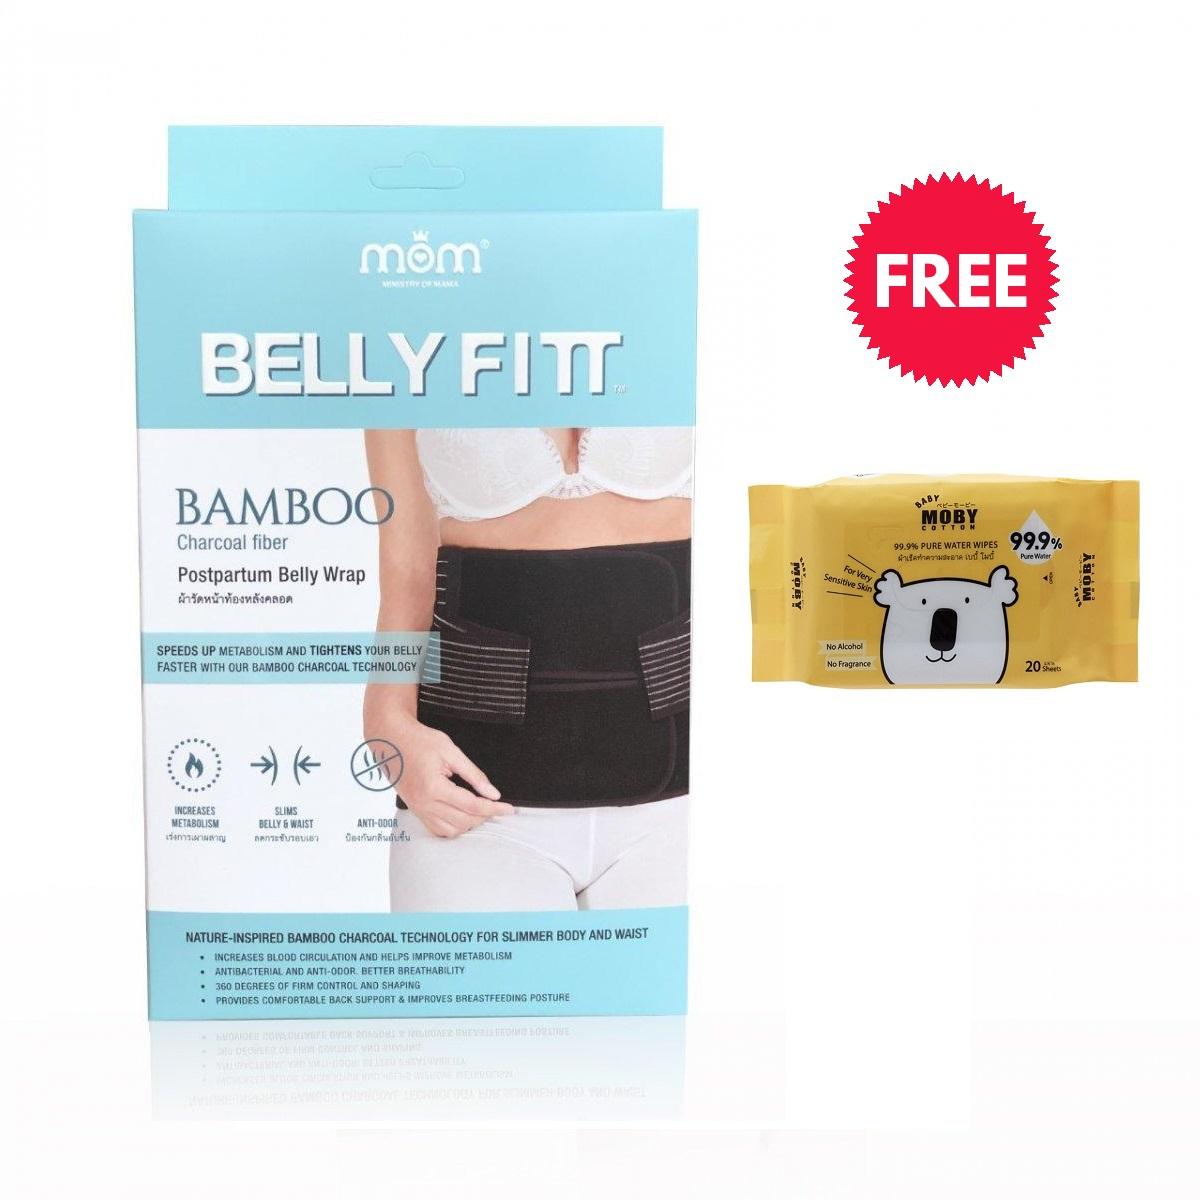 Mom Ministry Of Mama Belly Fitt ผ้ารัดหน้าท้องหลังคลอด Power Bamboo Charcoal. 